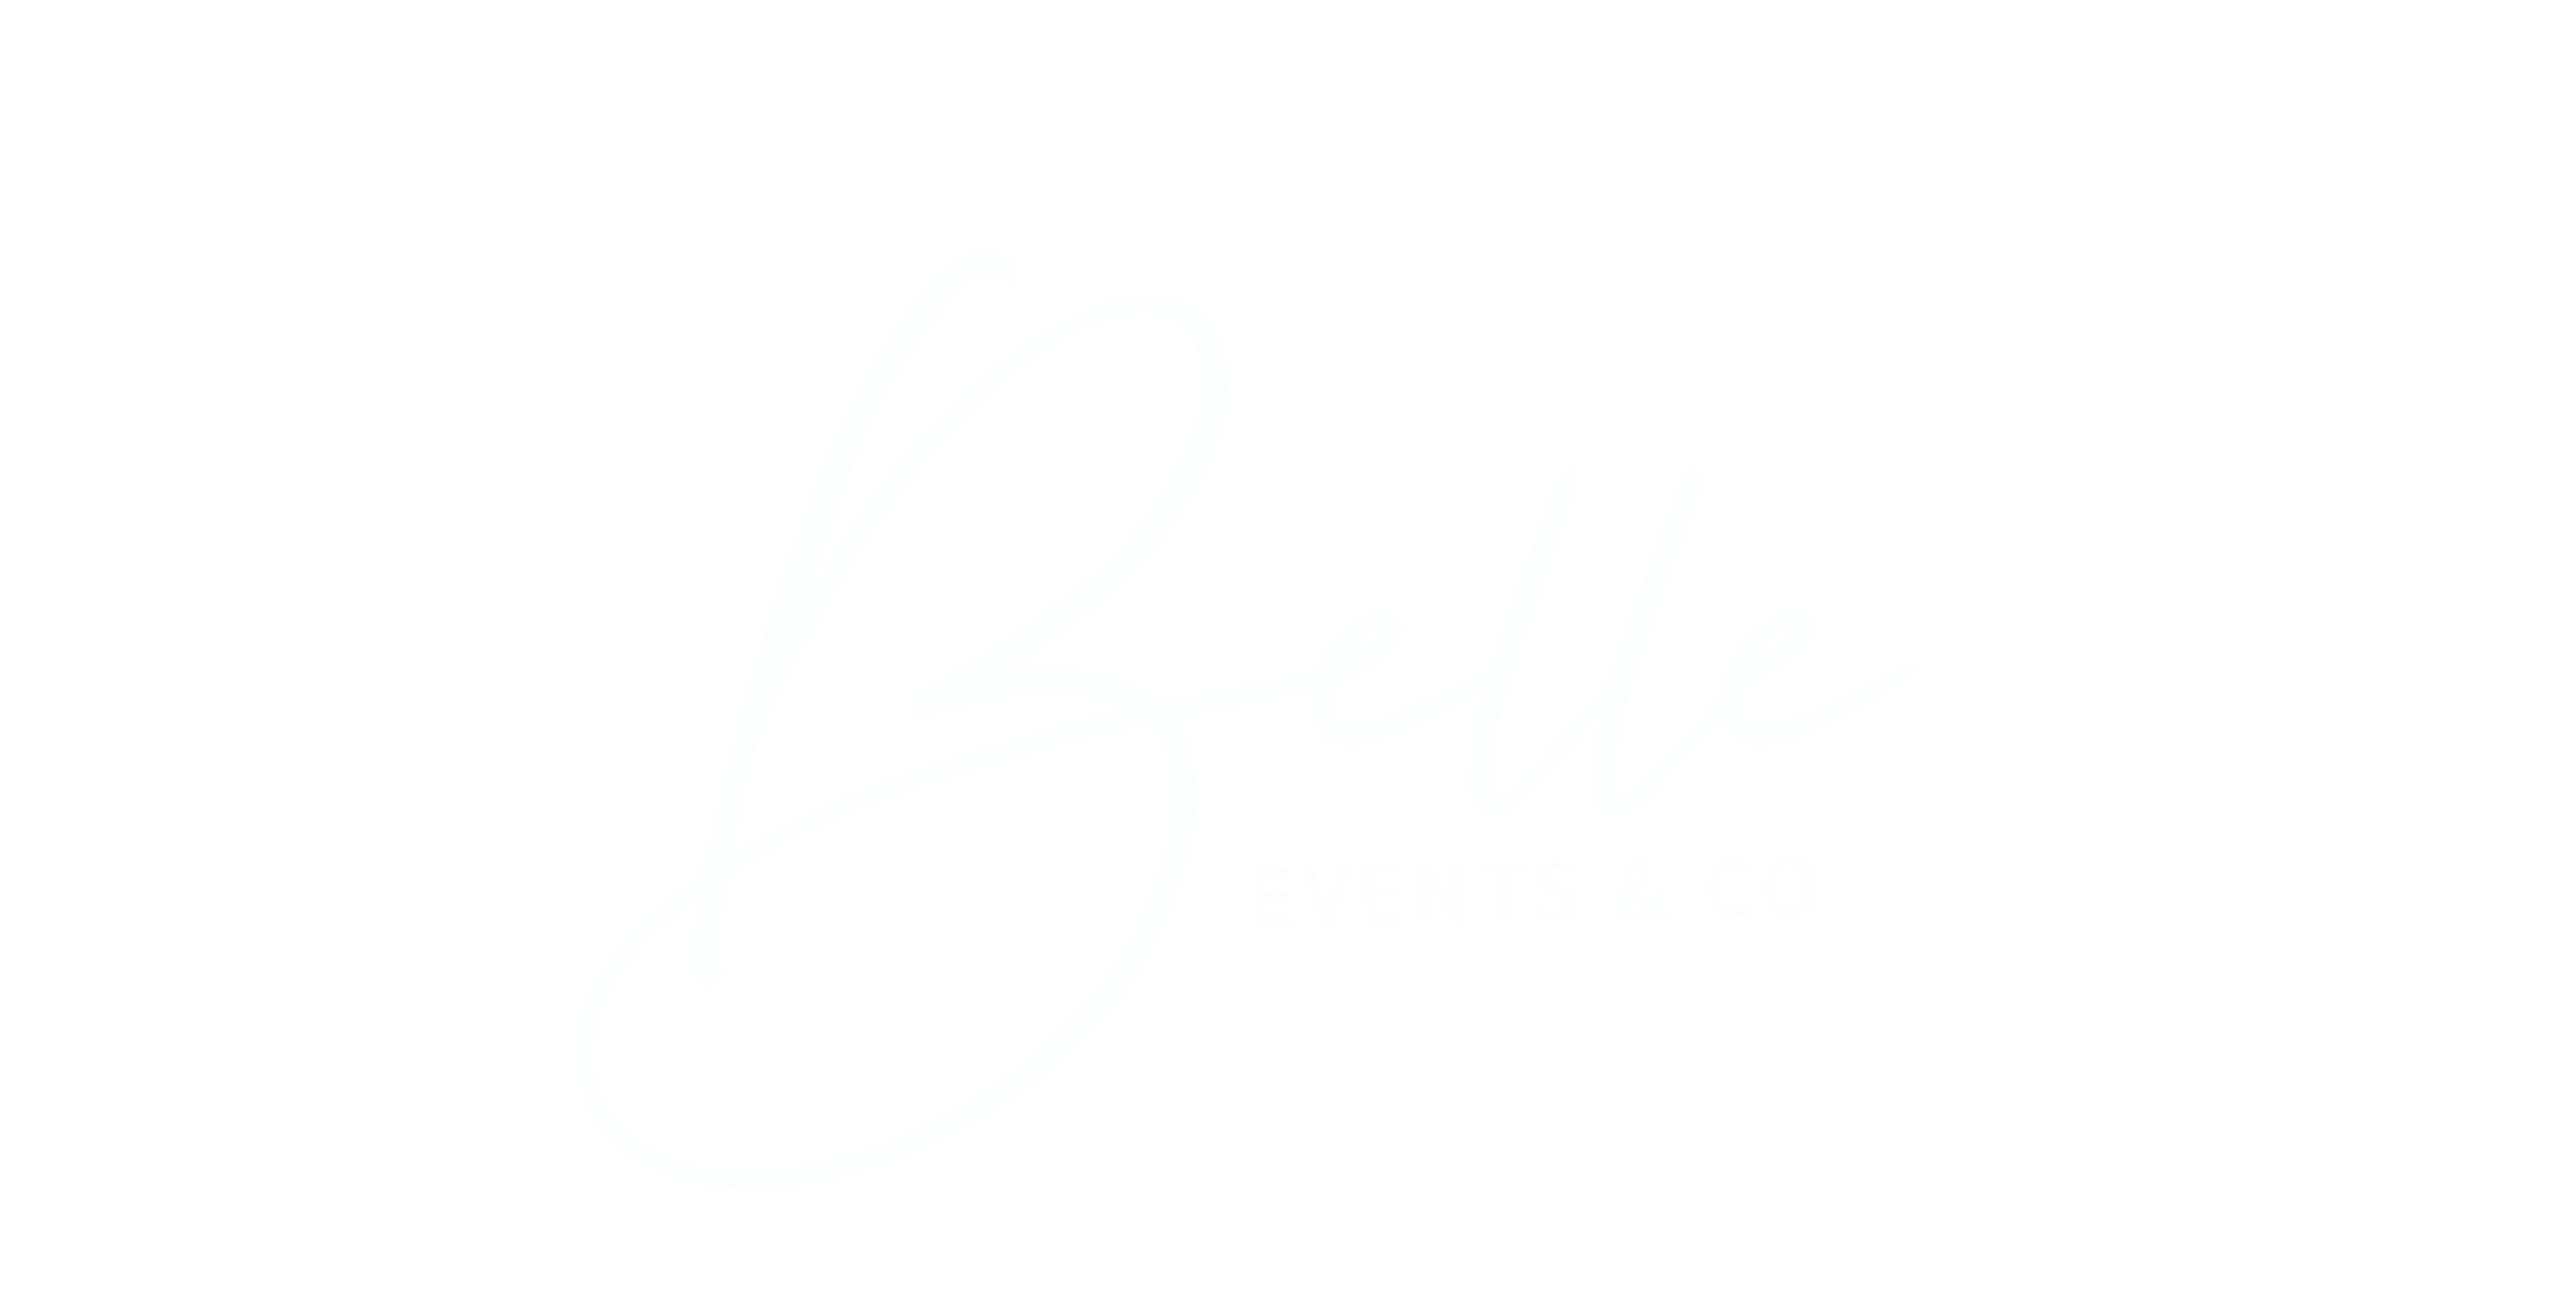 Belle Events & Co